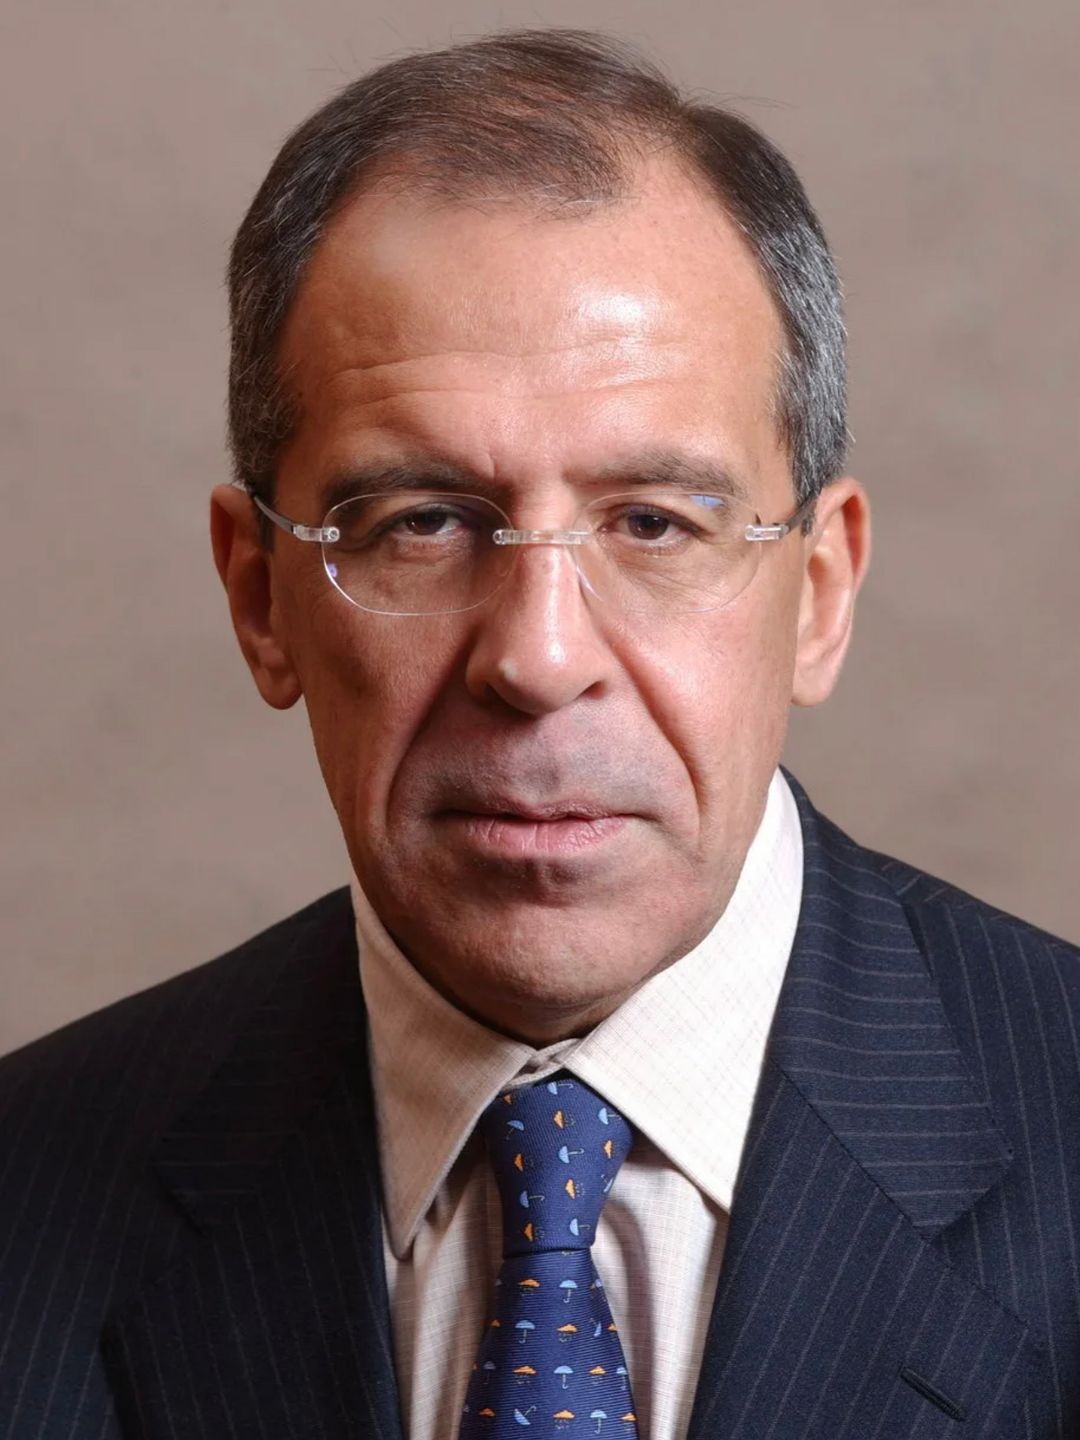 Sergey Lavrov how did he became famous